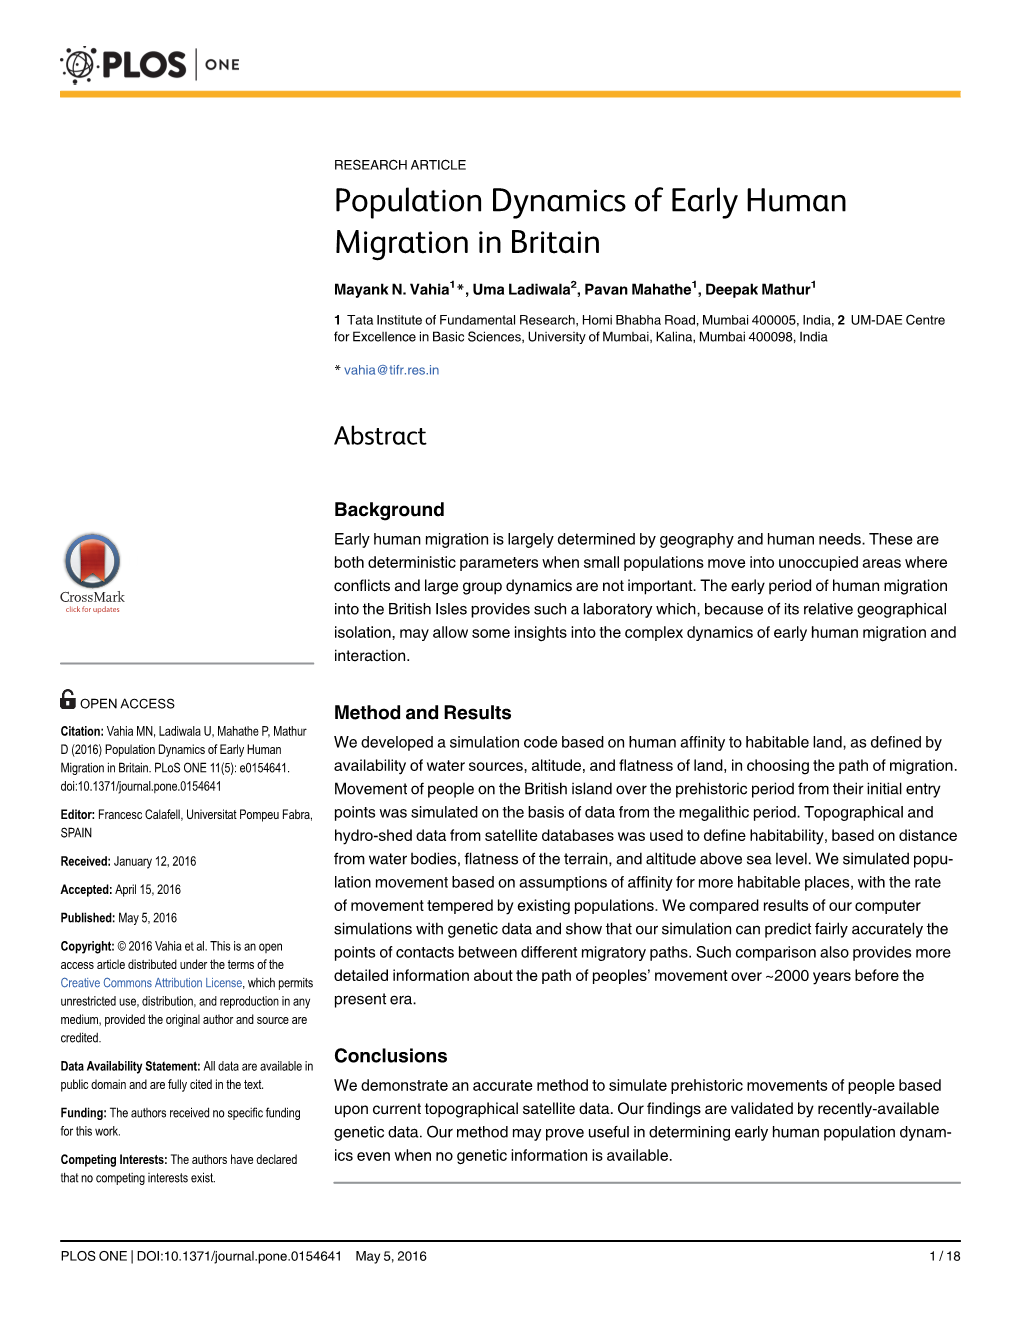 Population Dynamics of Early Human Migration in Britain